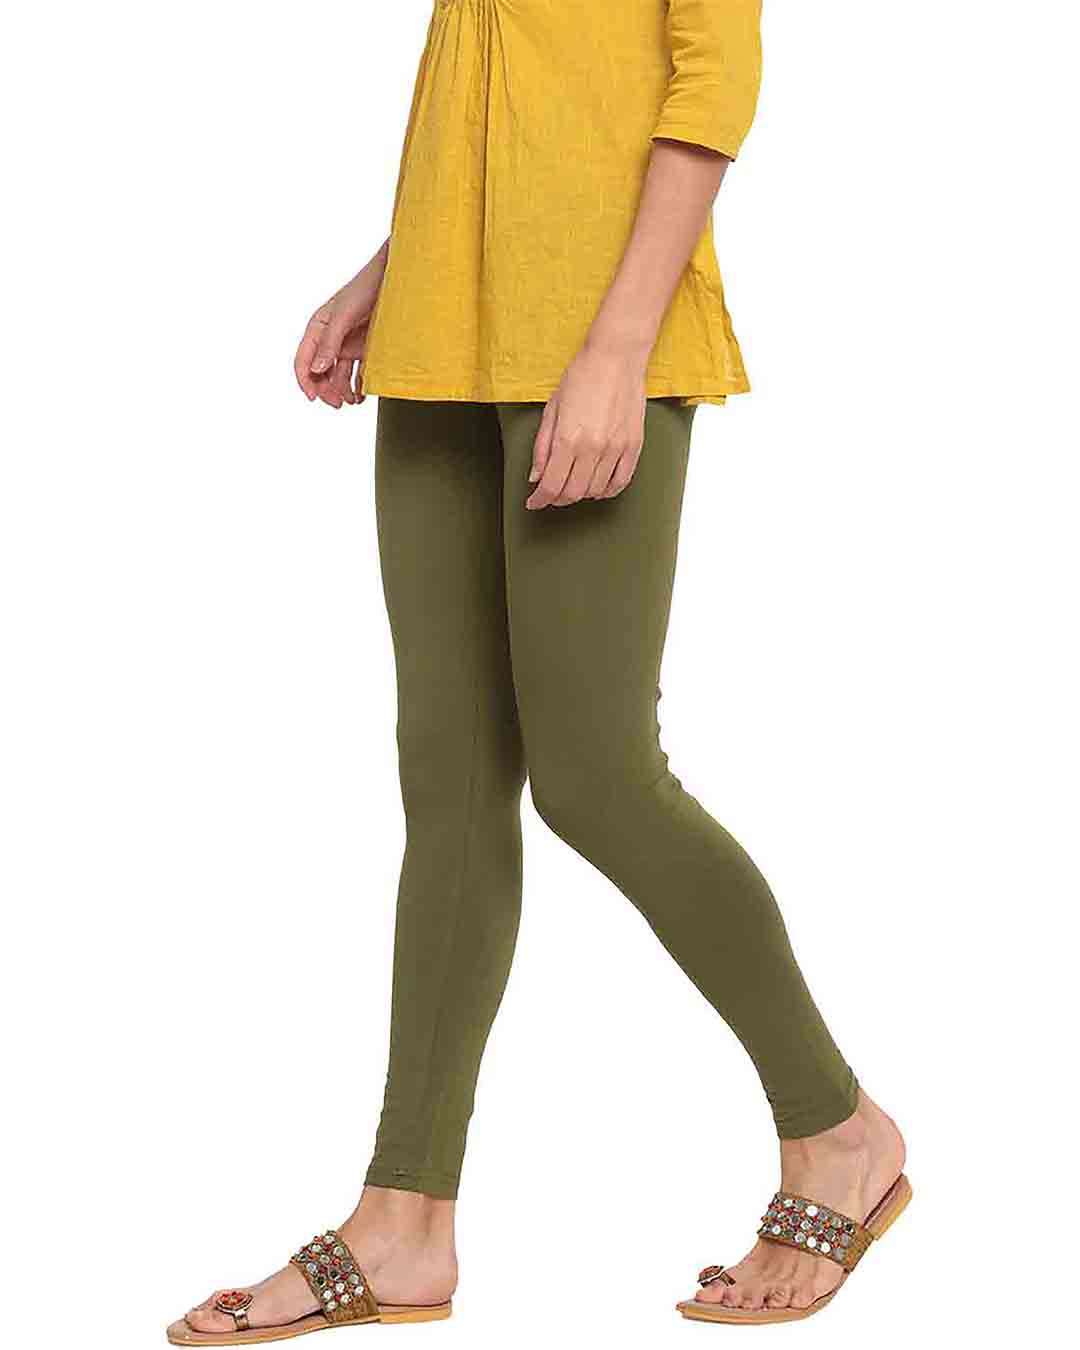 GO COLORS Cotton Ancle Length Legging (S, Dark Chocolate) in Bangalore at  best price by Indian Ethnic - Justdial